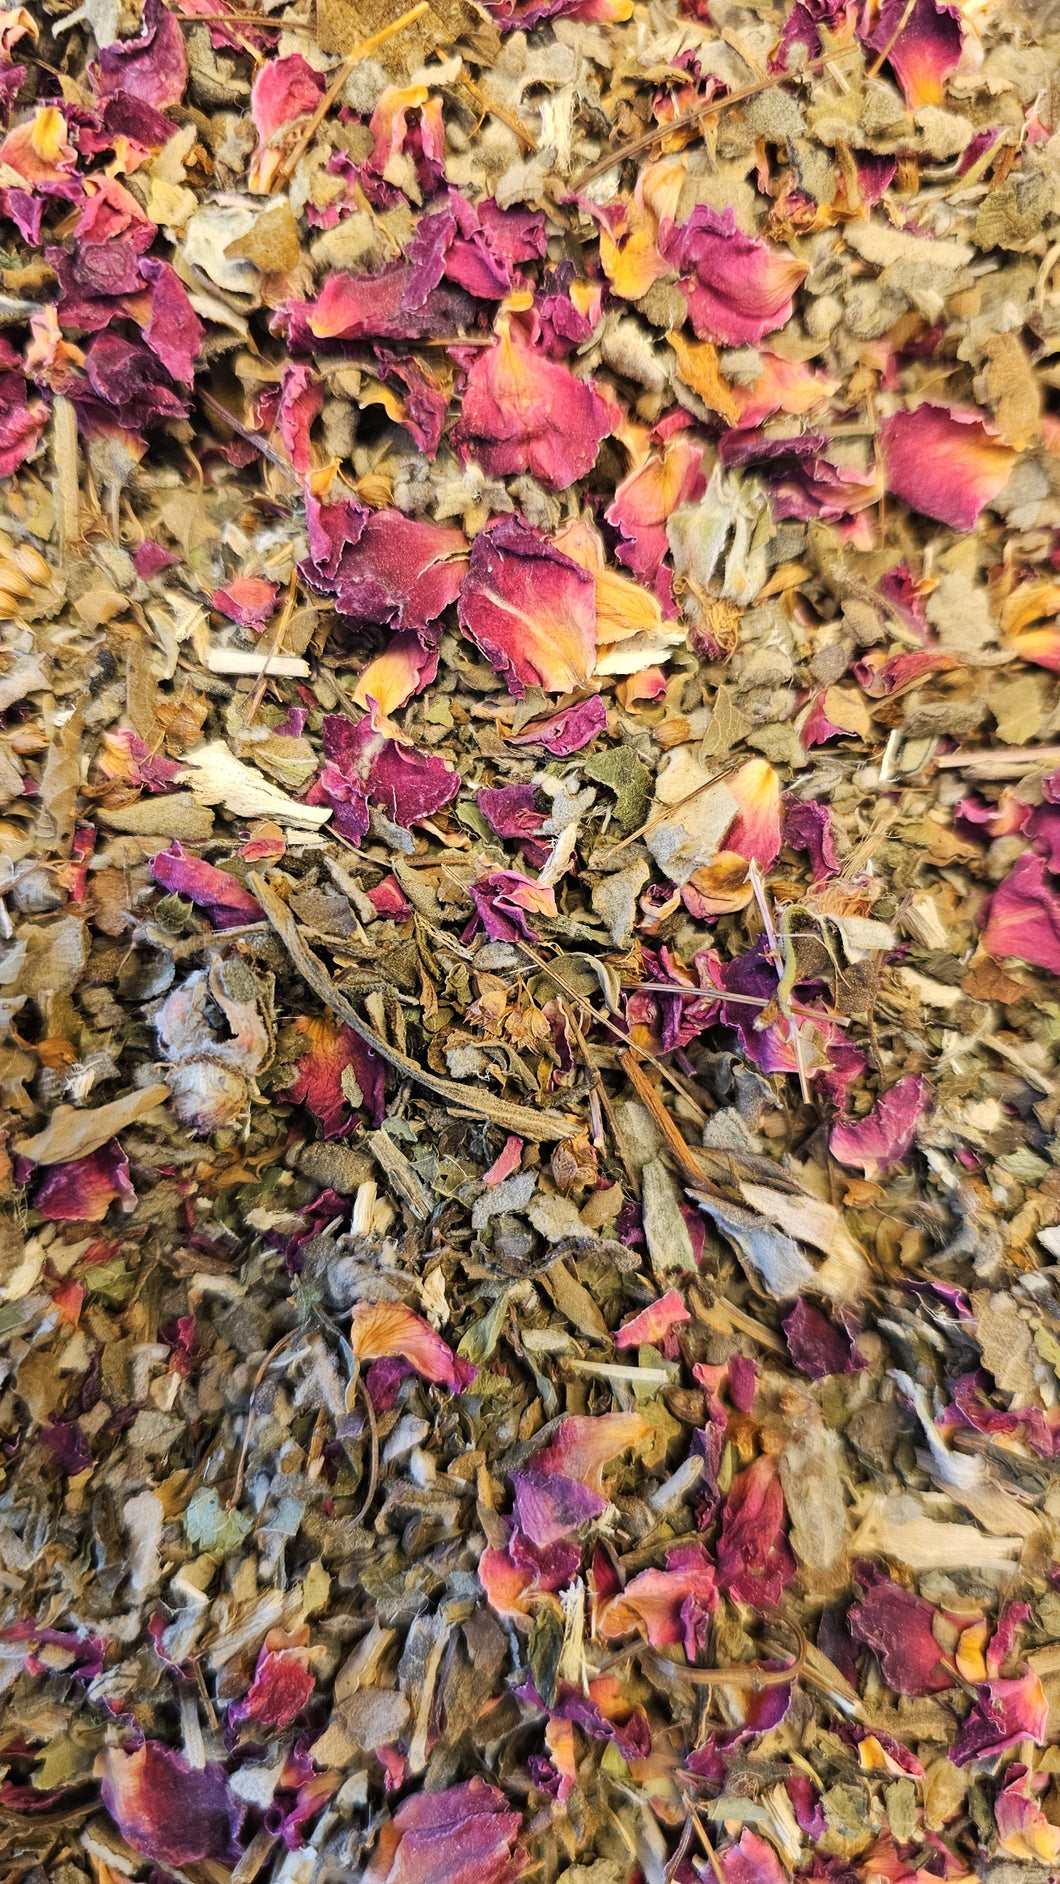 The Emotional Smokers Herbal Blend